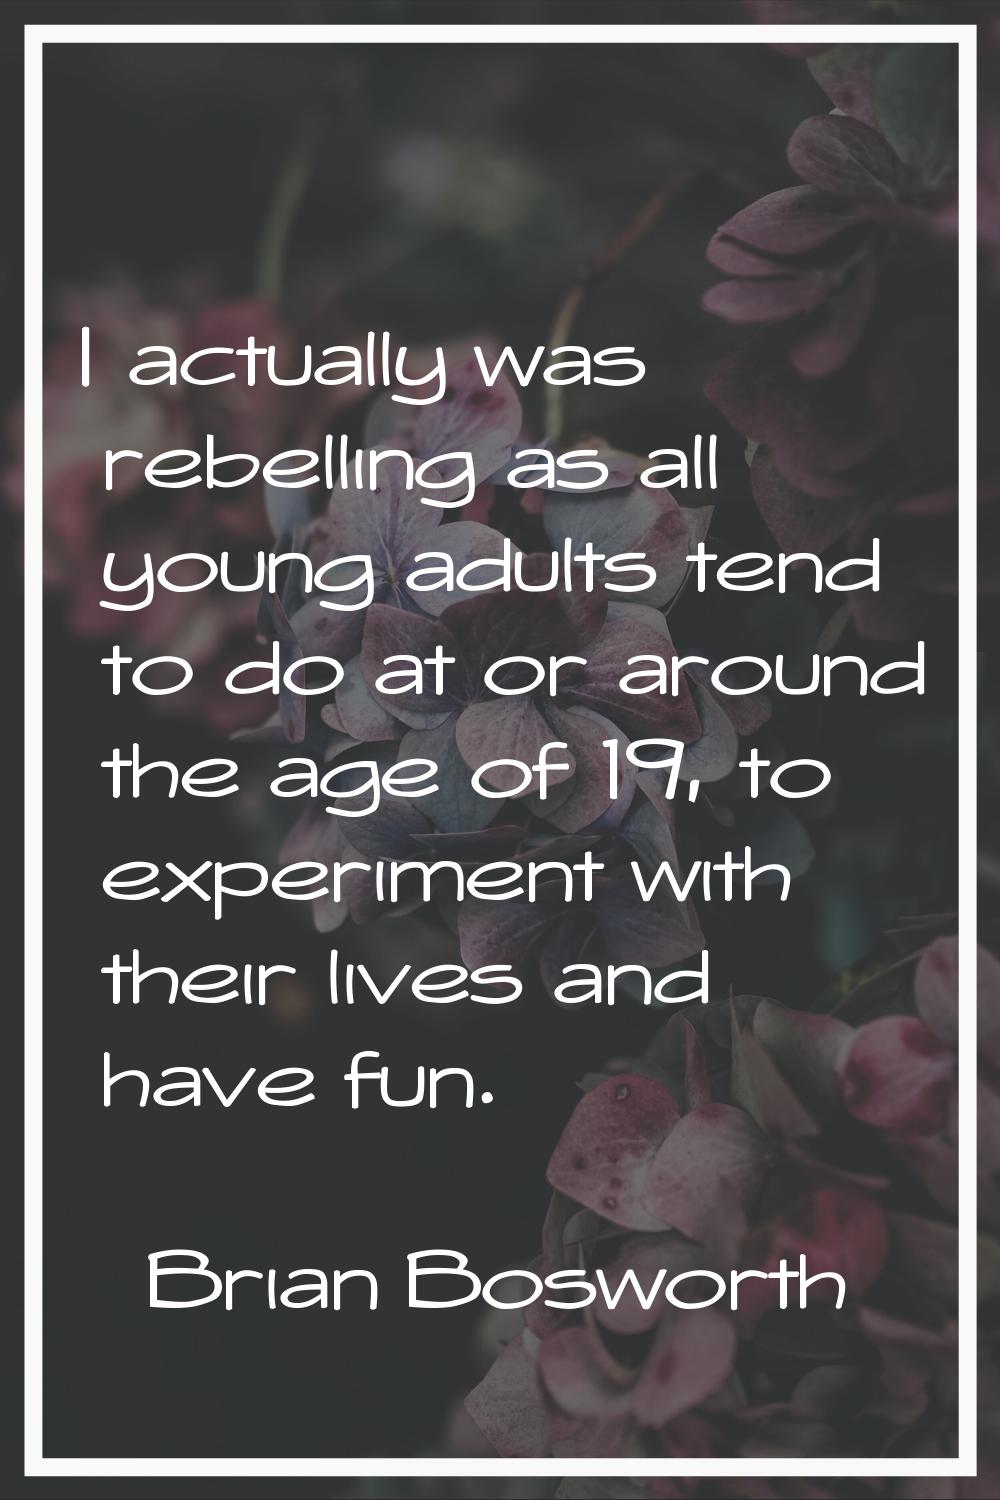 I actually was rebelling as all young adults tend to do at or around the age of 19, to experiment w